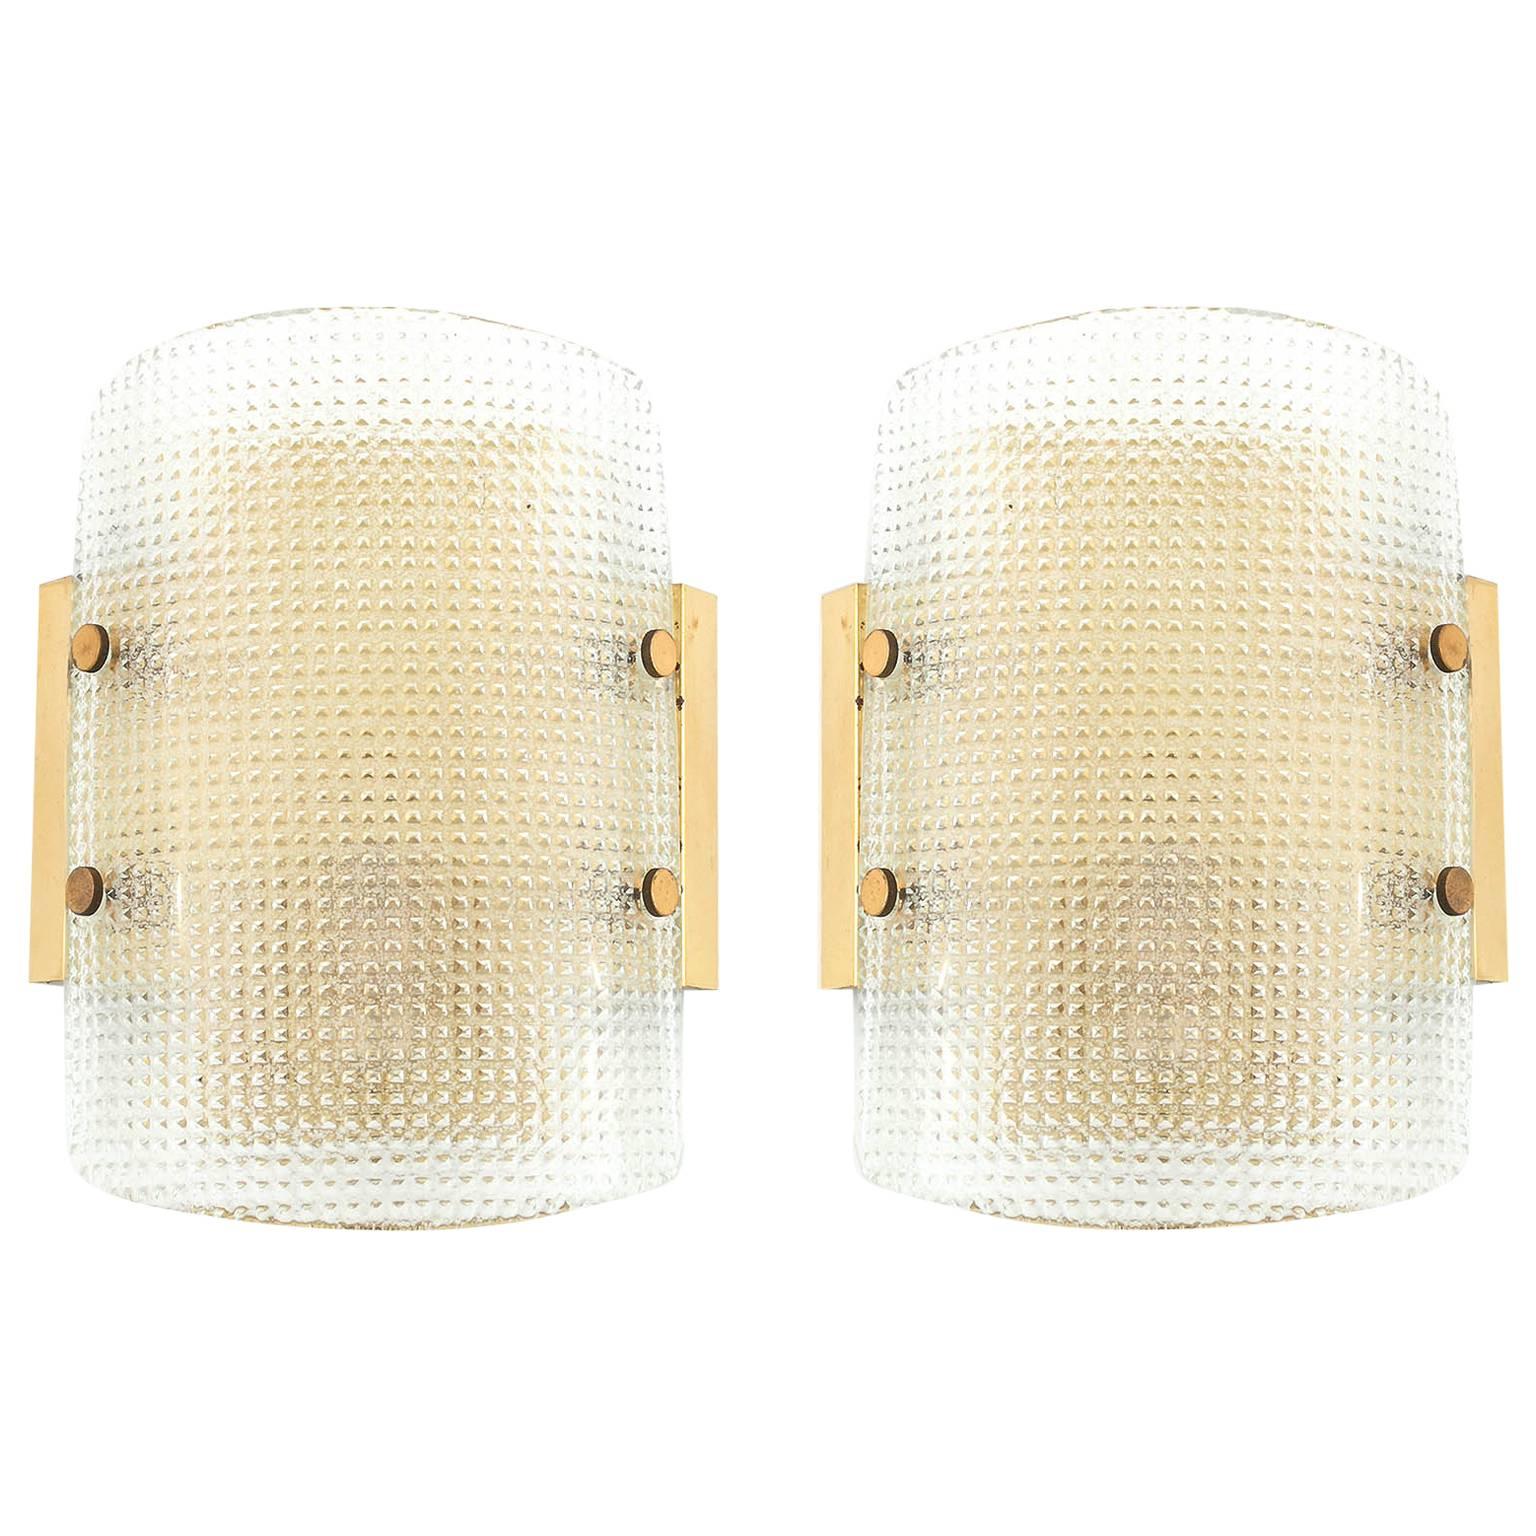 Pair of Hillebrand Wall Lights Sconces, Brass Glass, 1960s